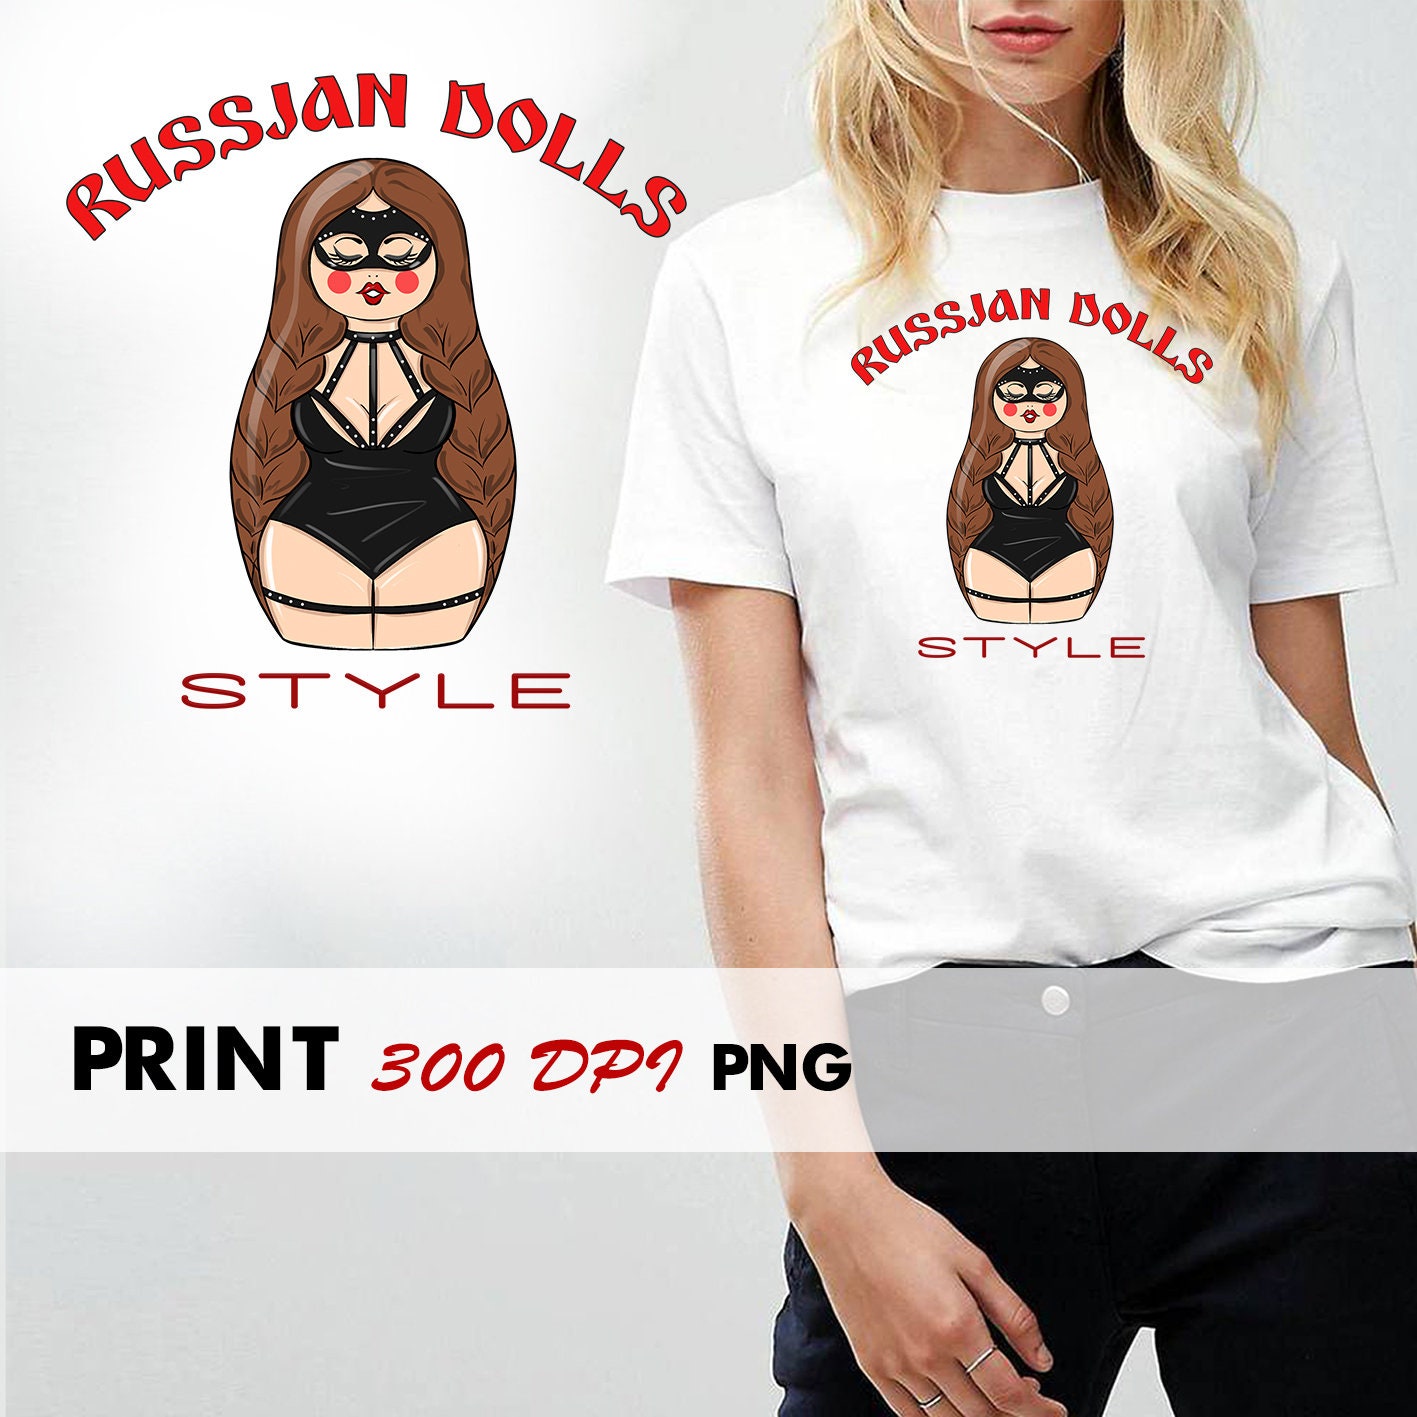 Russian Dolls Print Erotic Clipart Sex Poster Png File Etsy